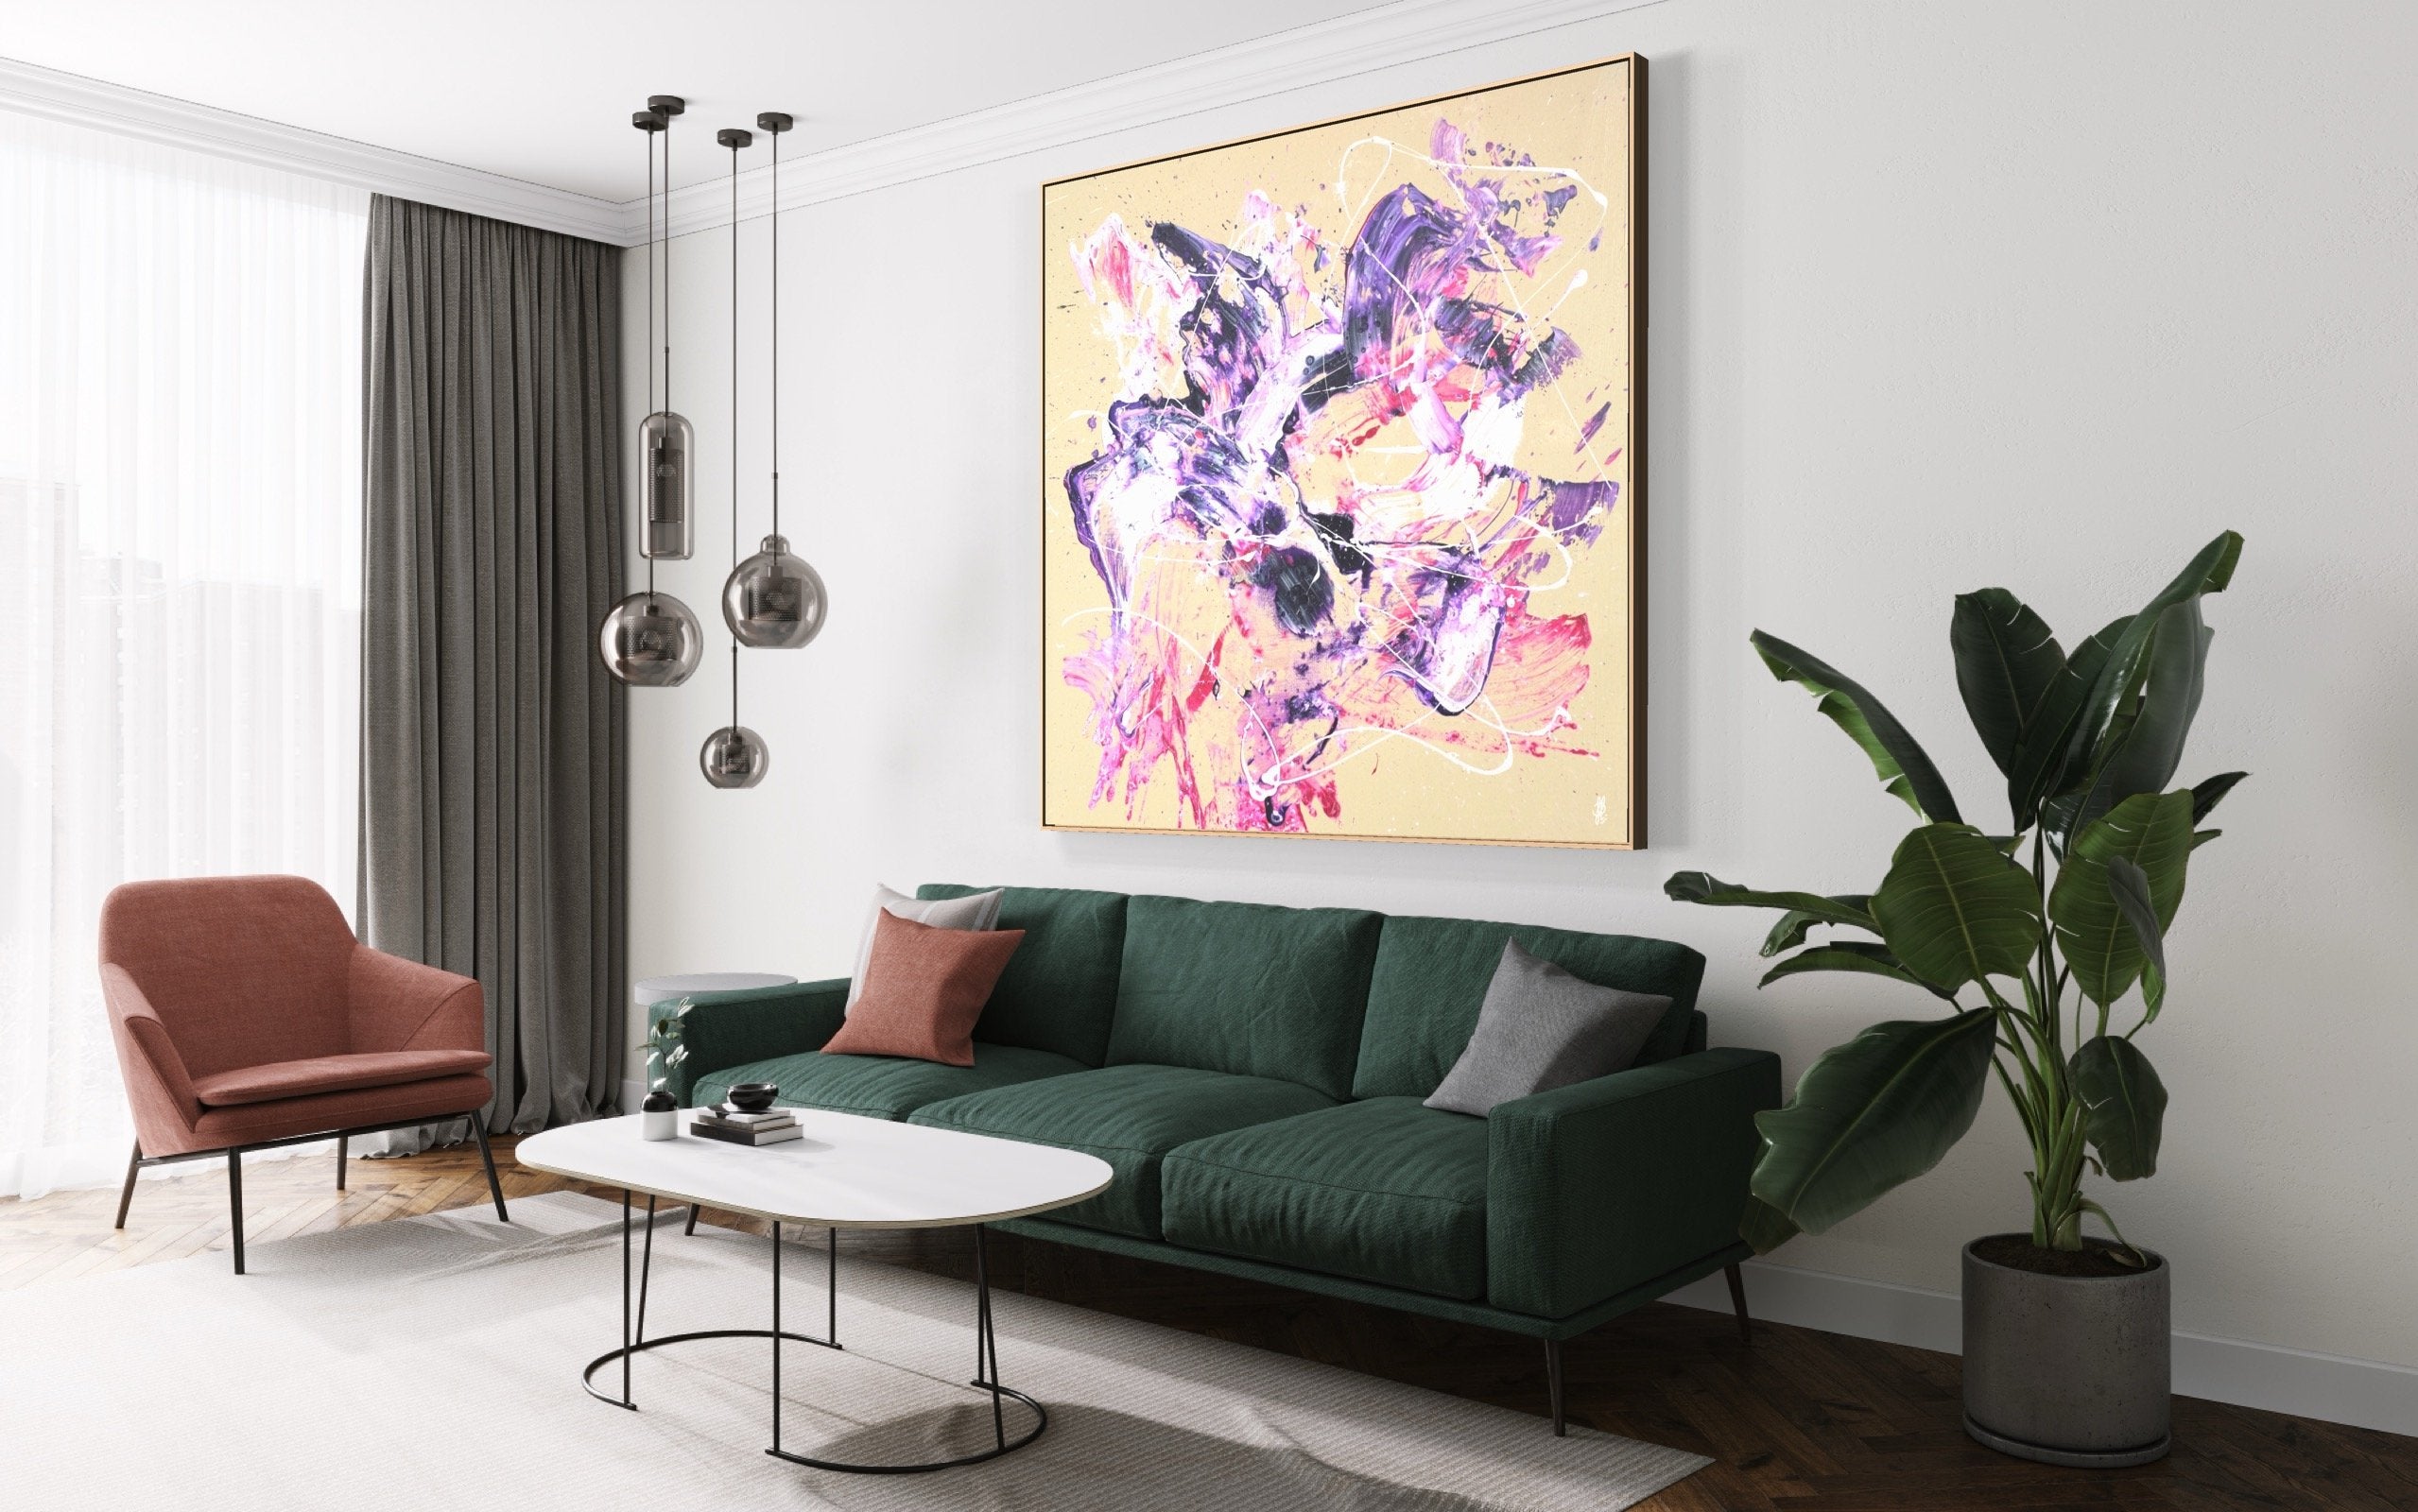 Canvas print: "Less Is More #5"